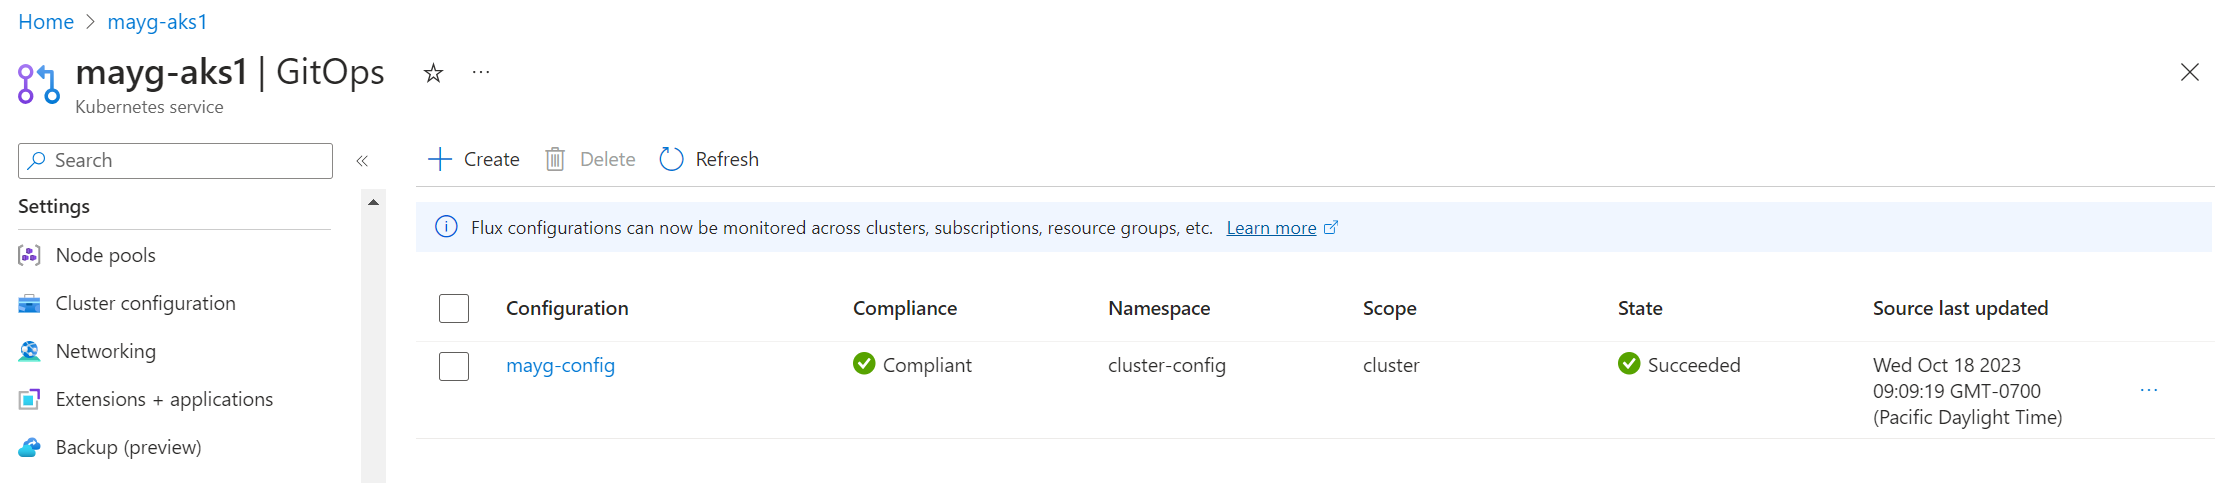 Screenshot of cluster compliance and other values in the Azure portal.